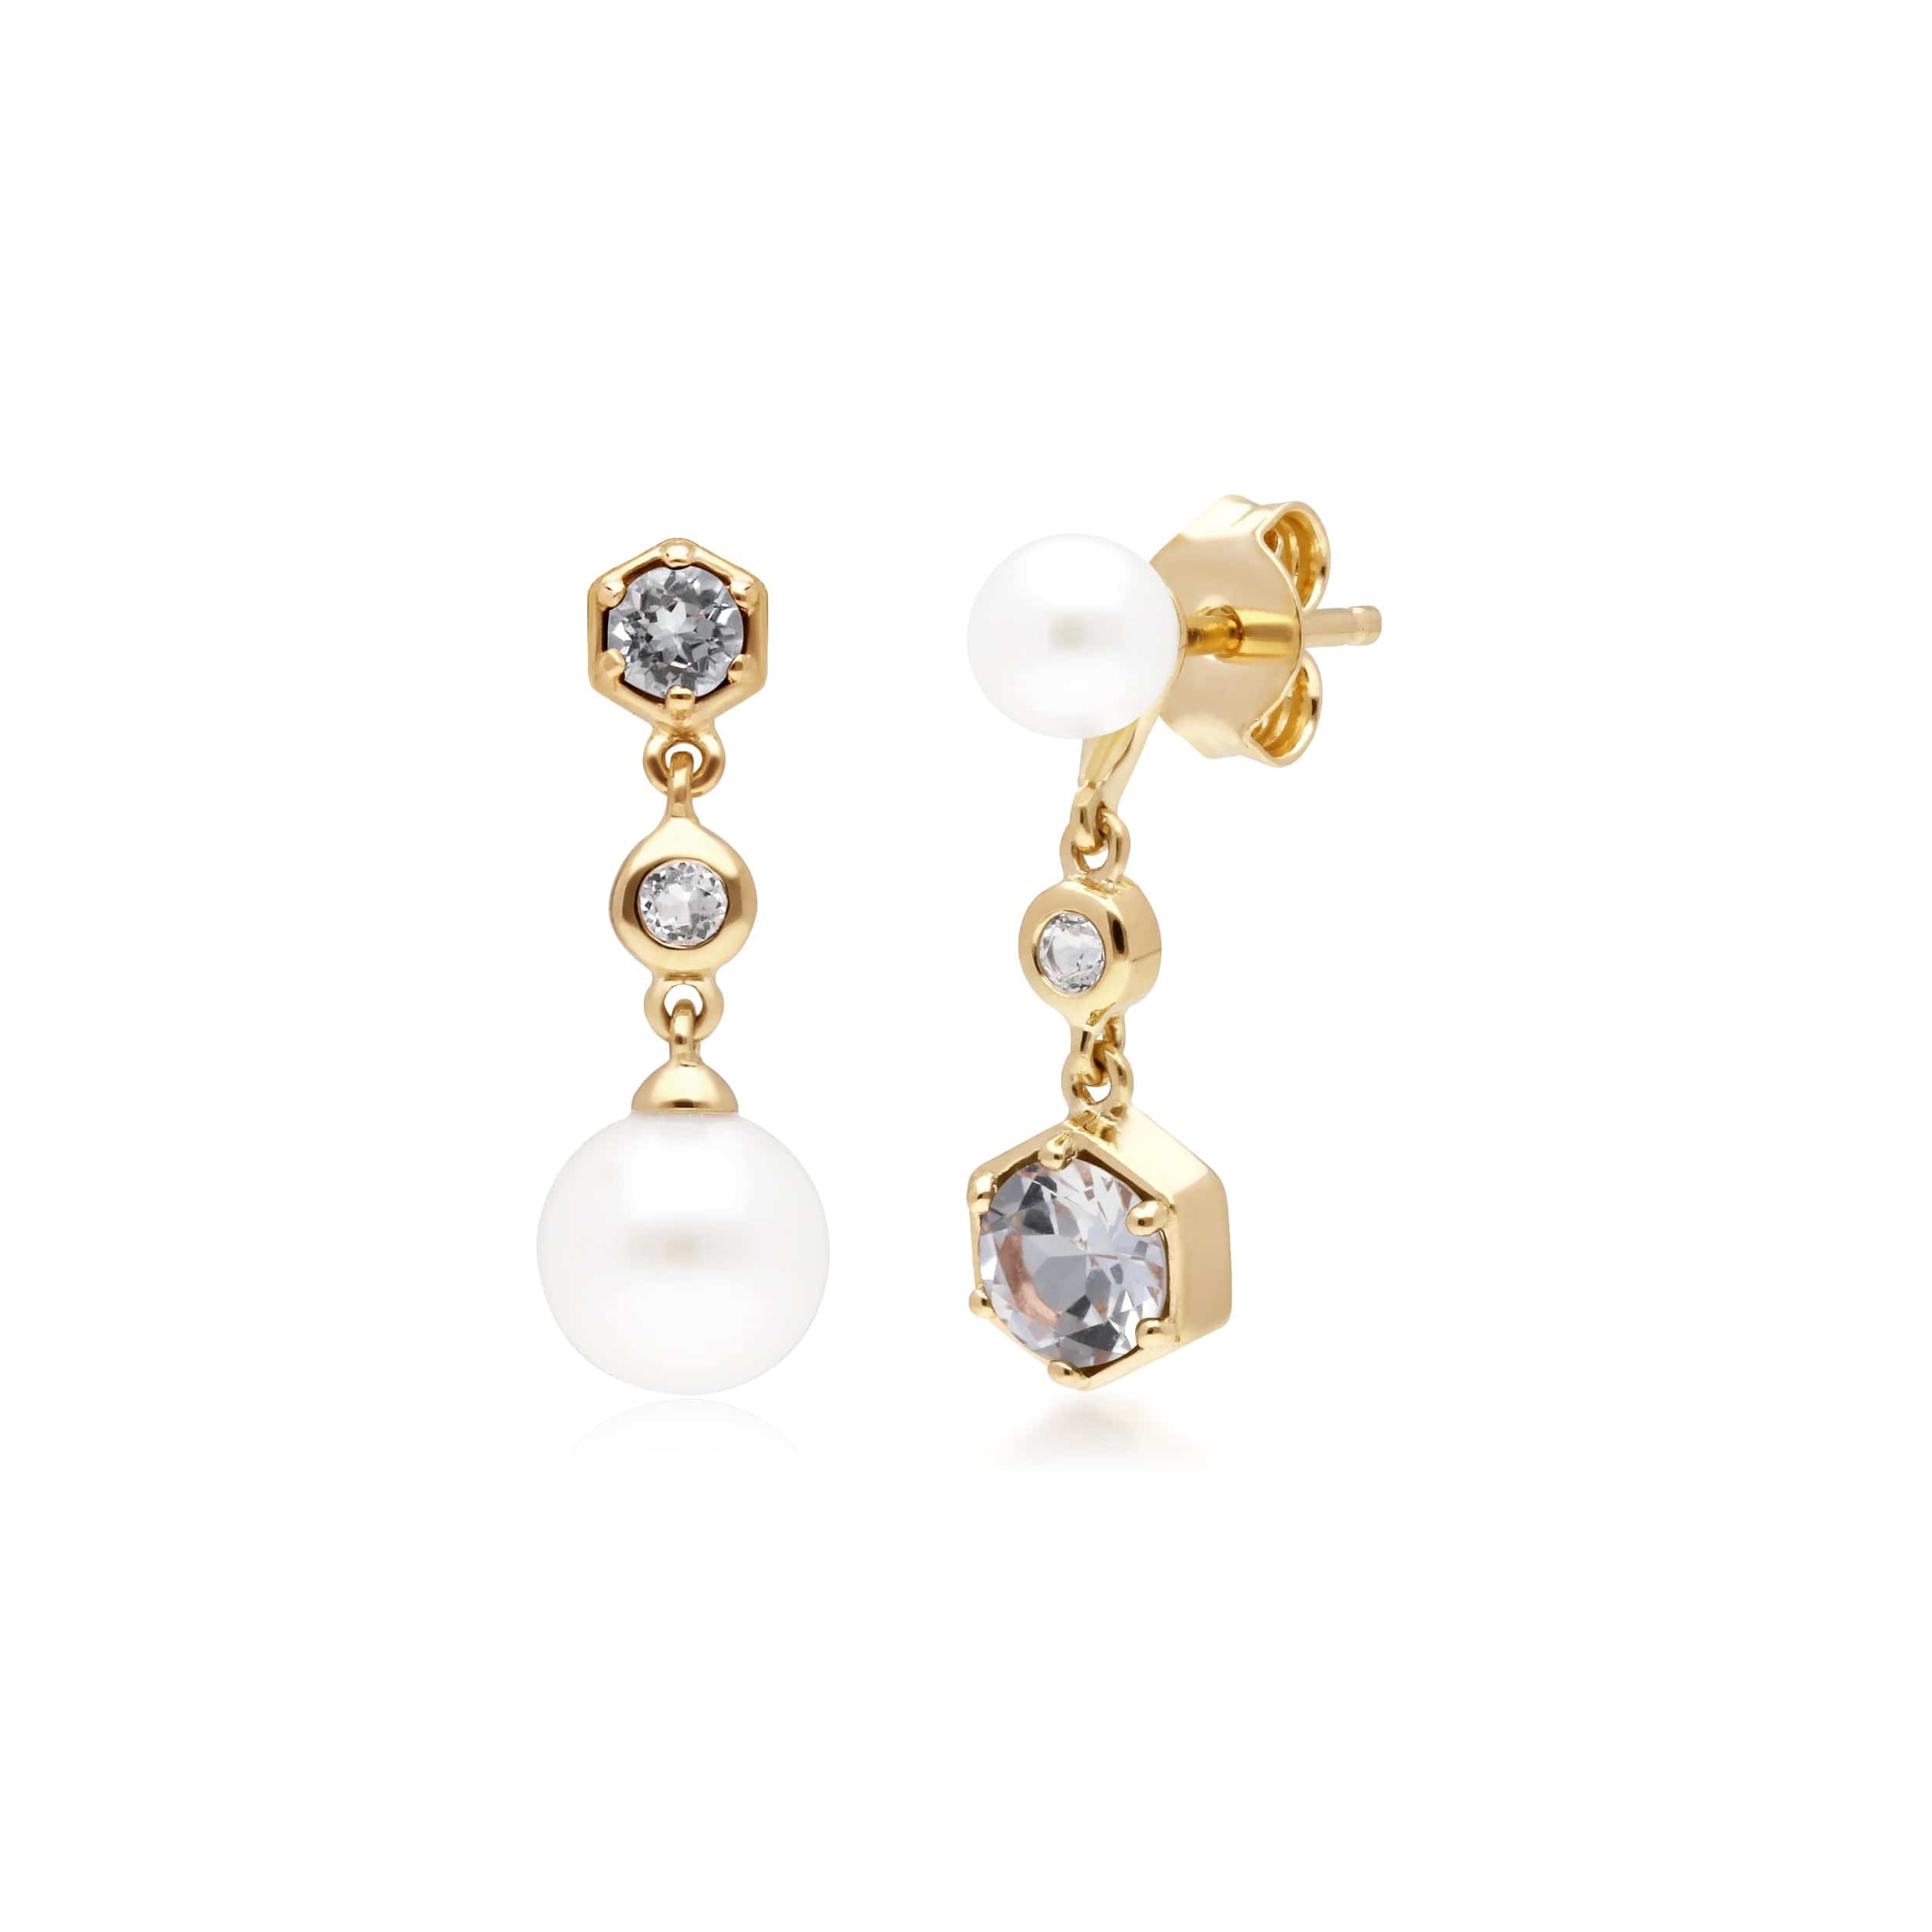 Modern Pearl, White Topaz Mismatched Drop Earrings in Gold Plated Silver